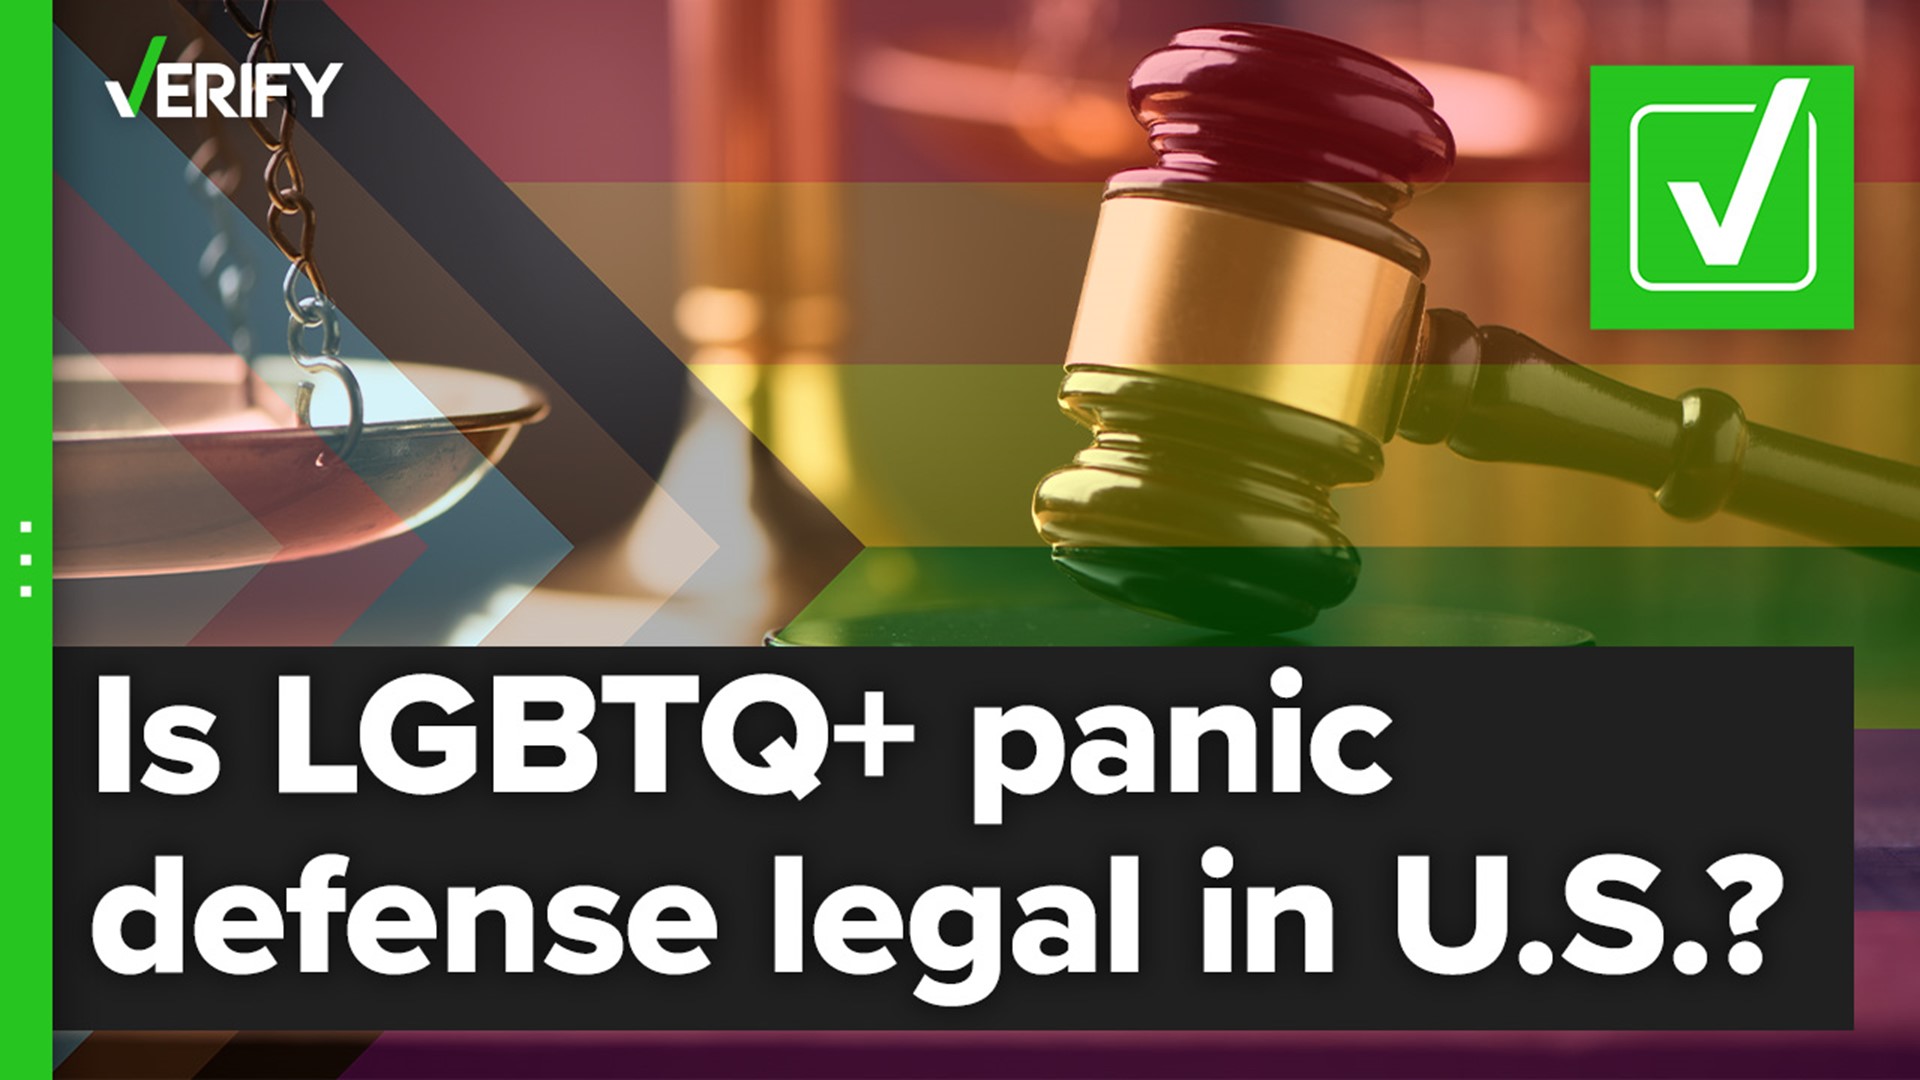 The LGBTQ+ panic defense is when a defendant argues that the victim’s sexual orientation or gender identity/expression justified their violent actions.